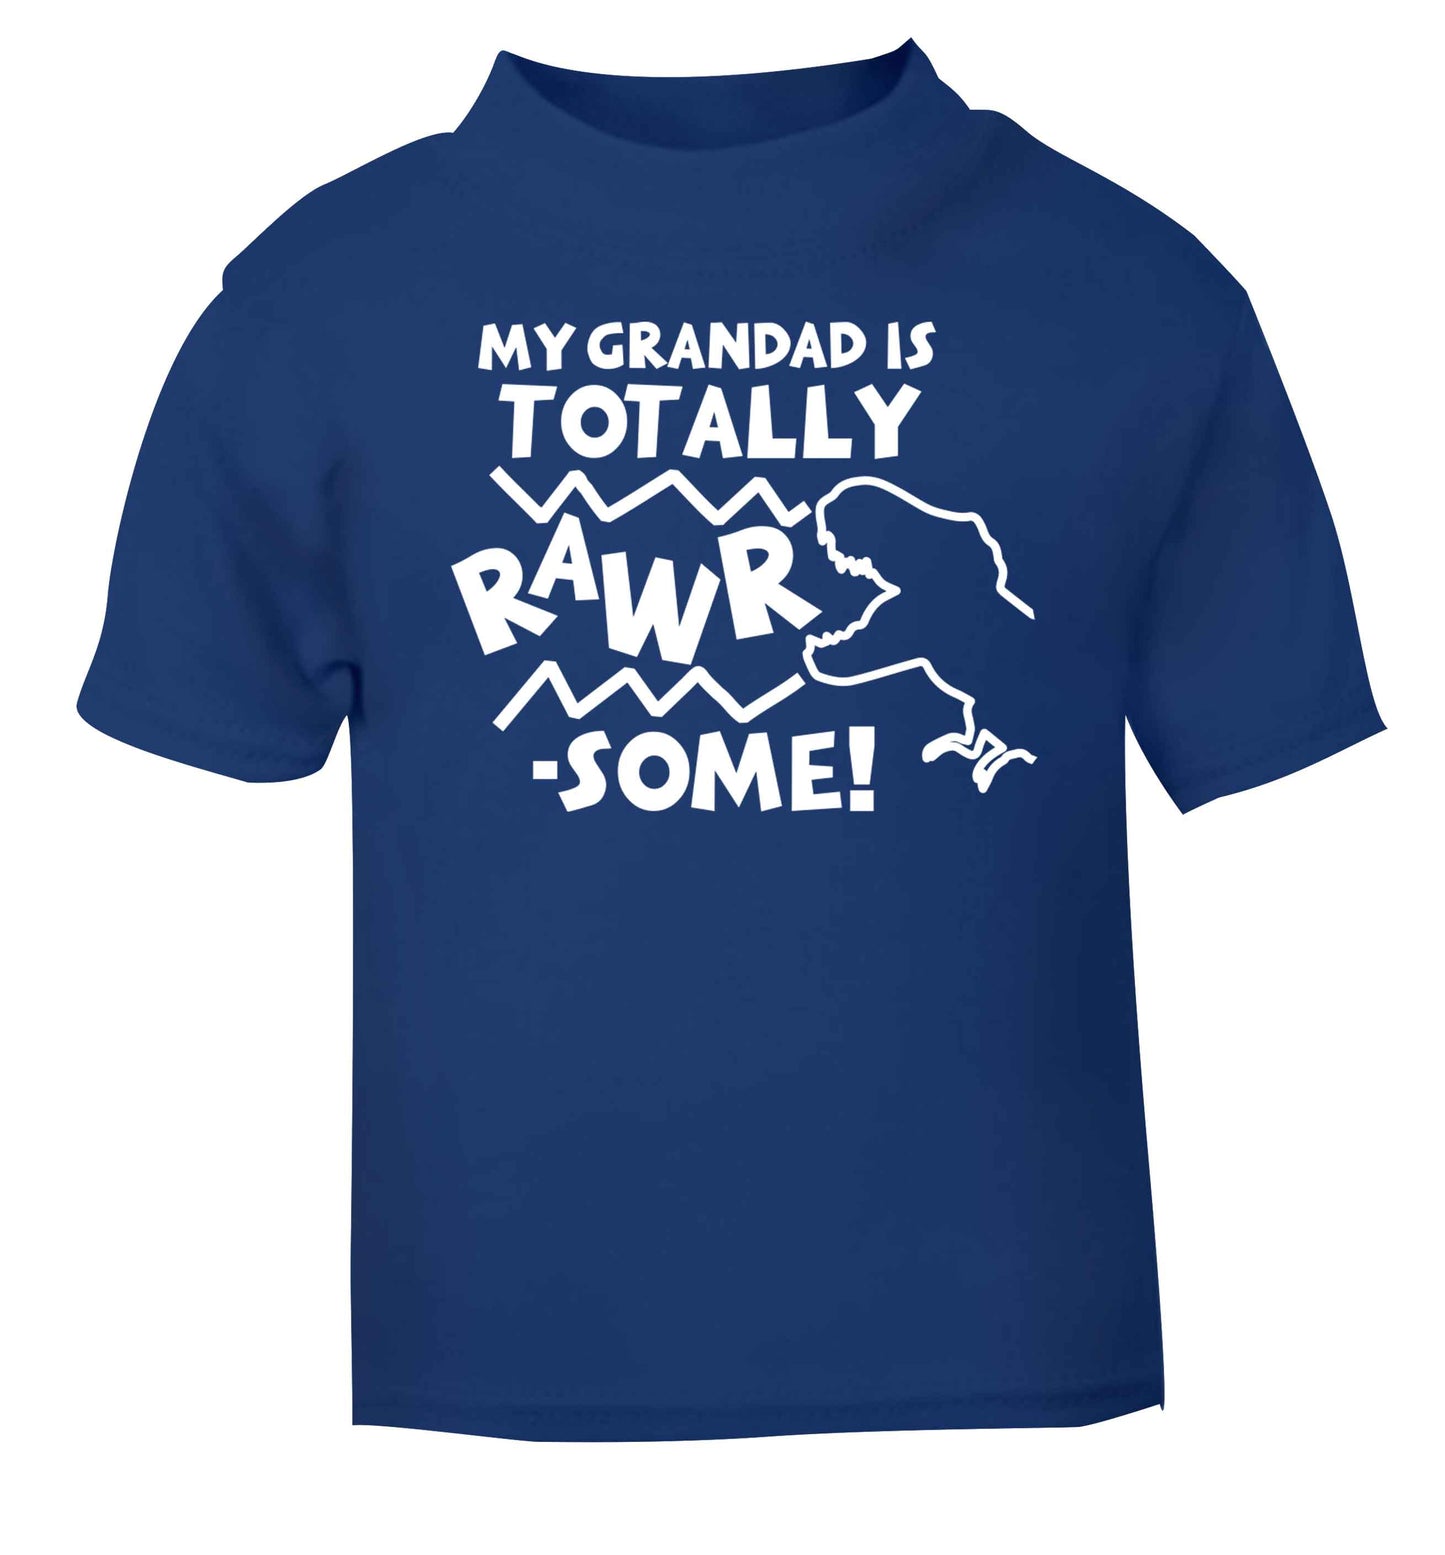 My grandad is totally rawrsome blue baby toddler Tshirt 2 Years